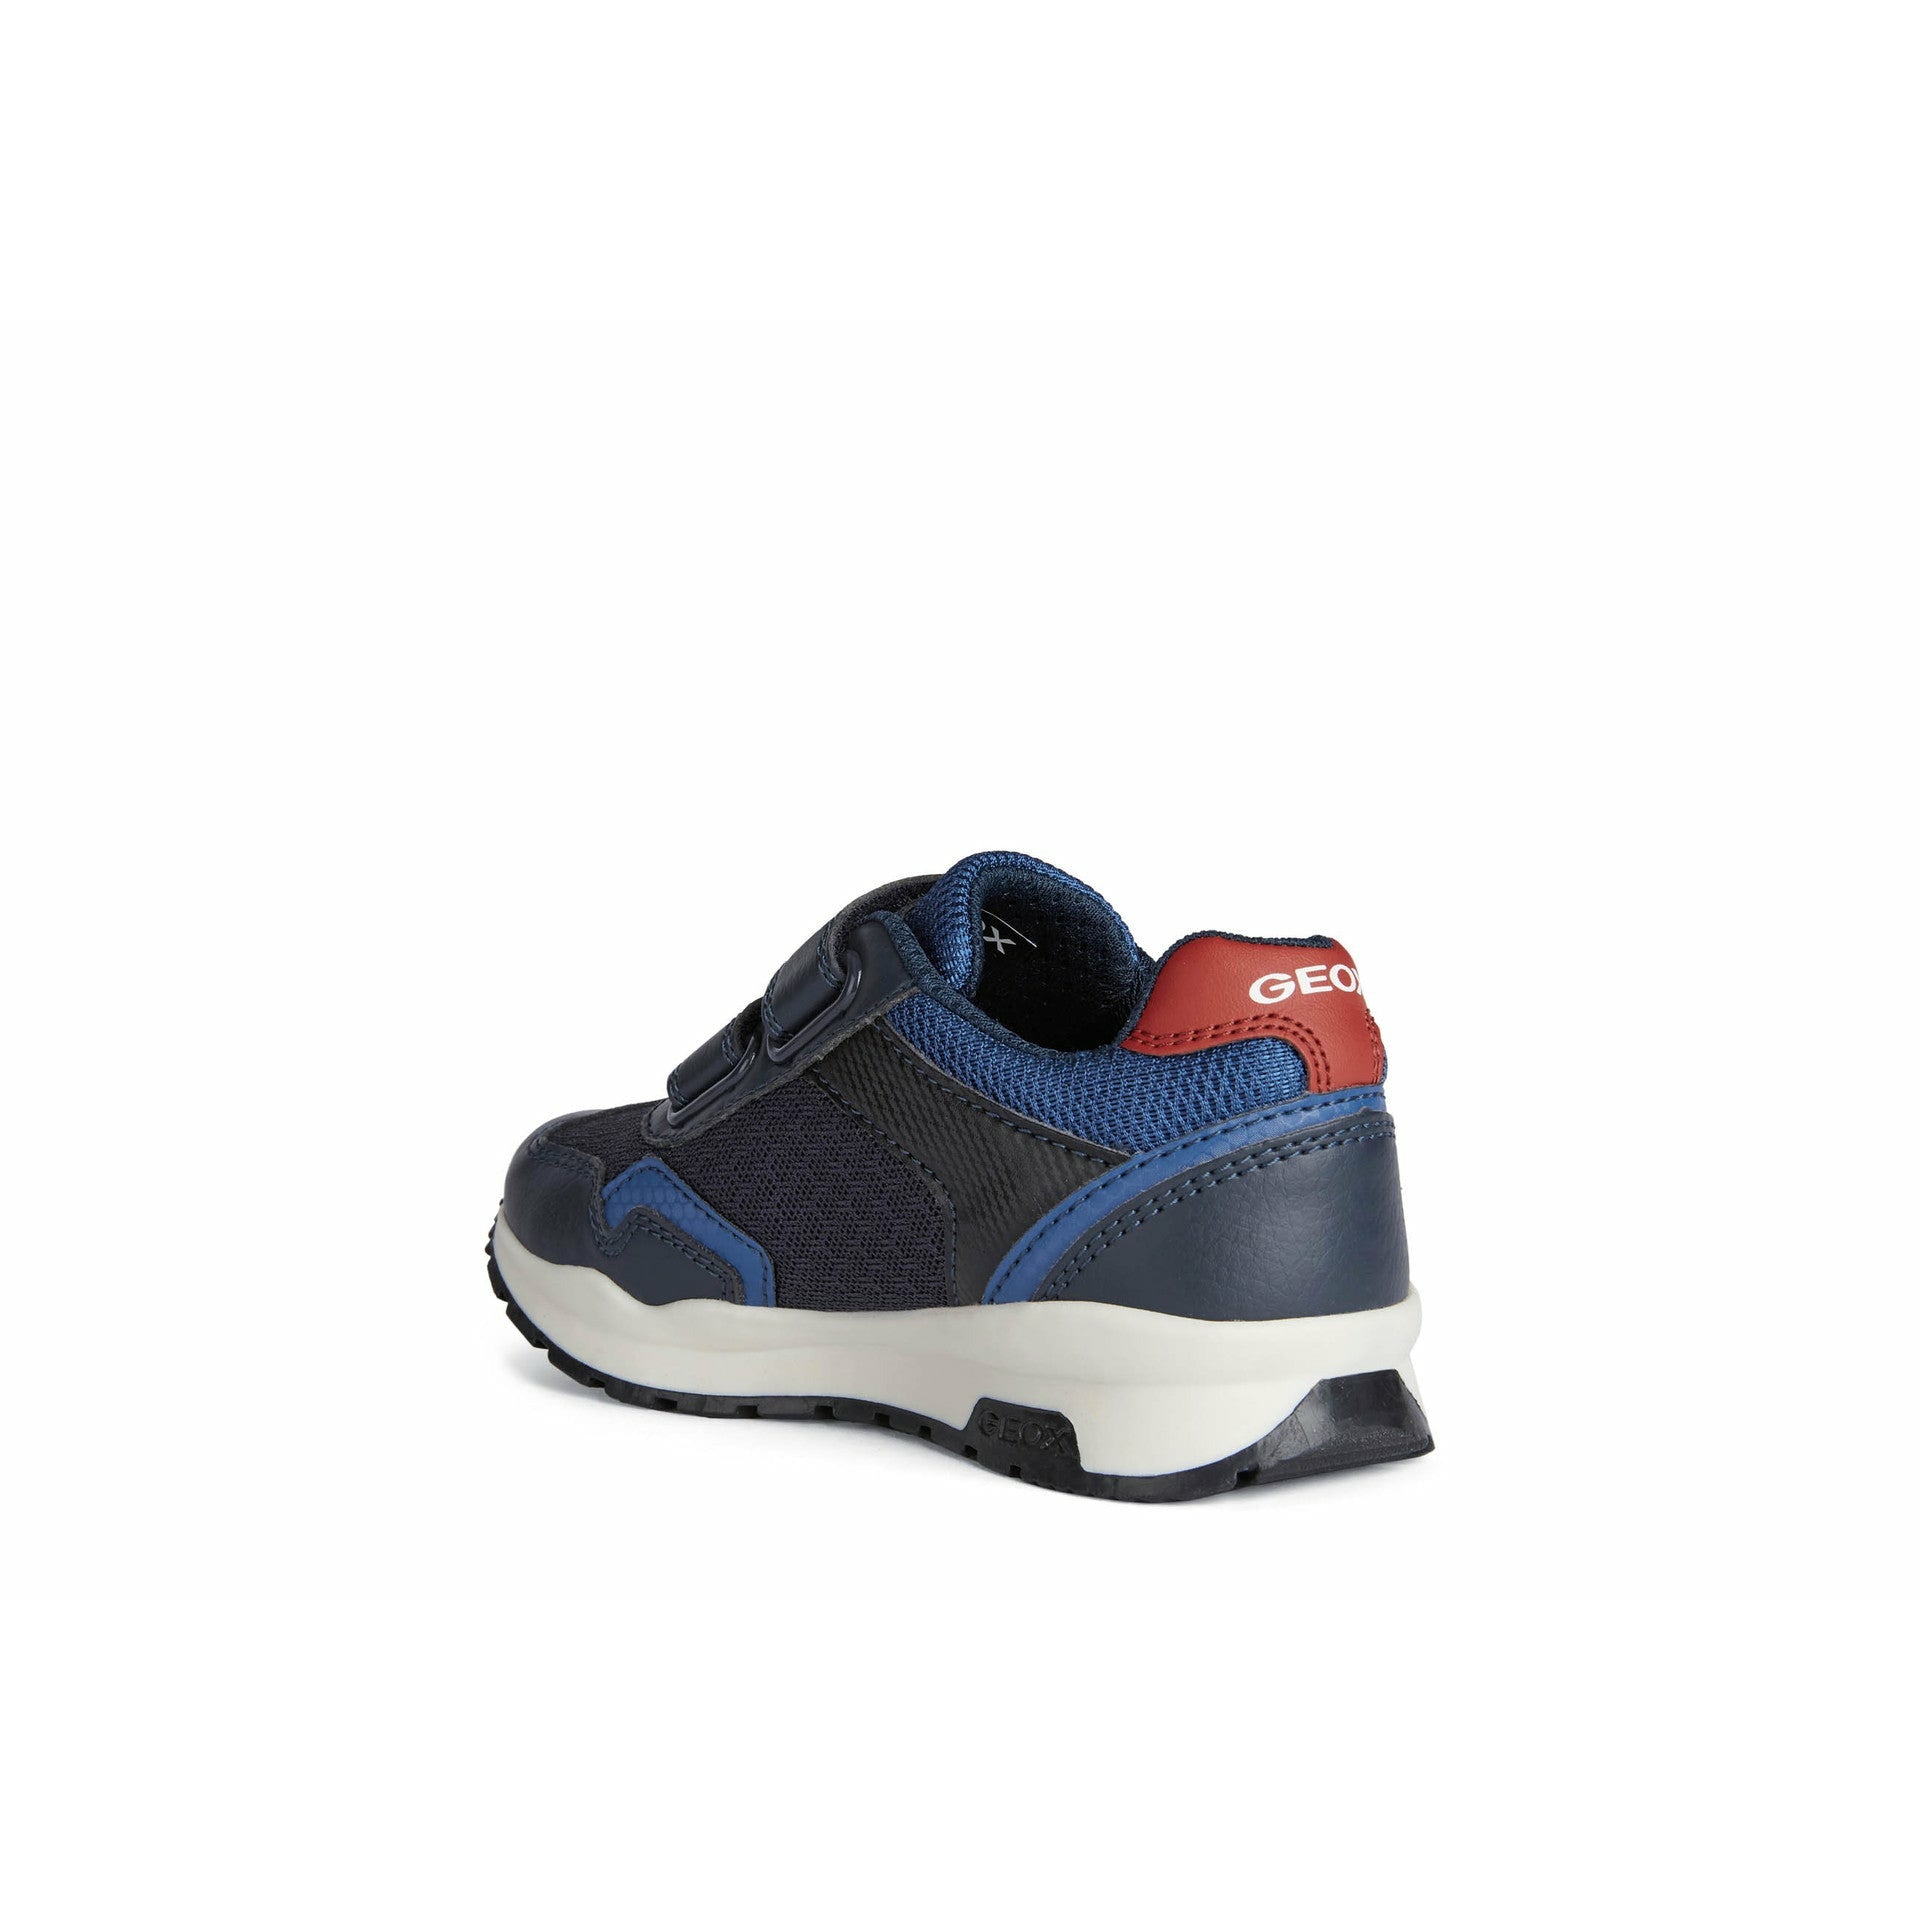 Geox Pavel - Boys Velcro Trainer in Navy/Red